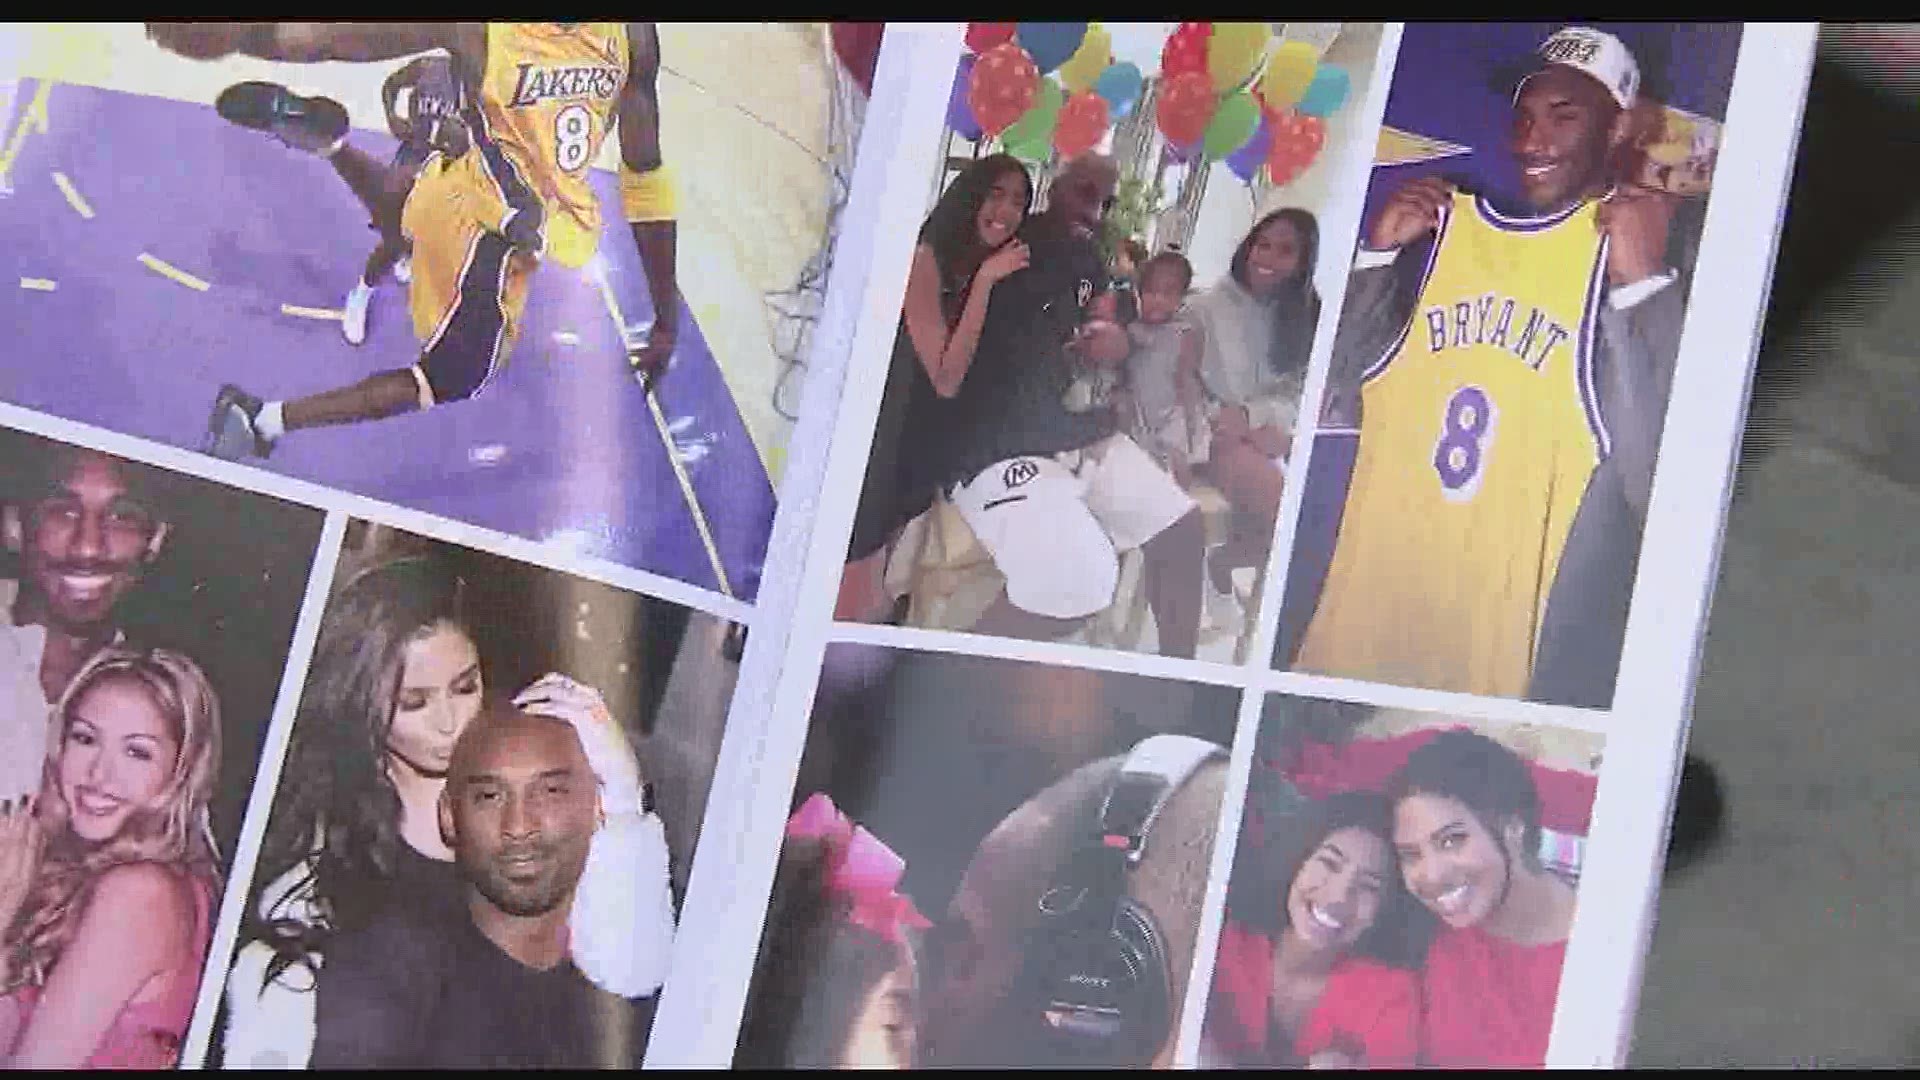 The celebration of life was held in the Staples Center in Los Angeles.